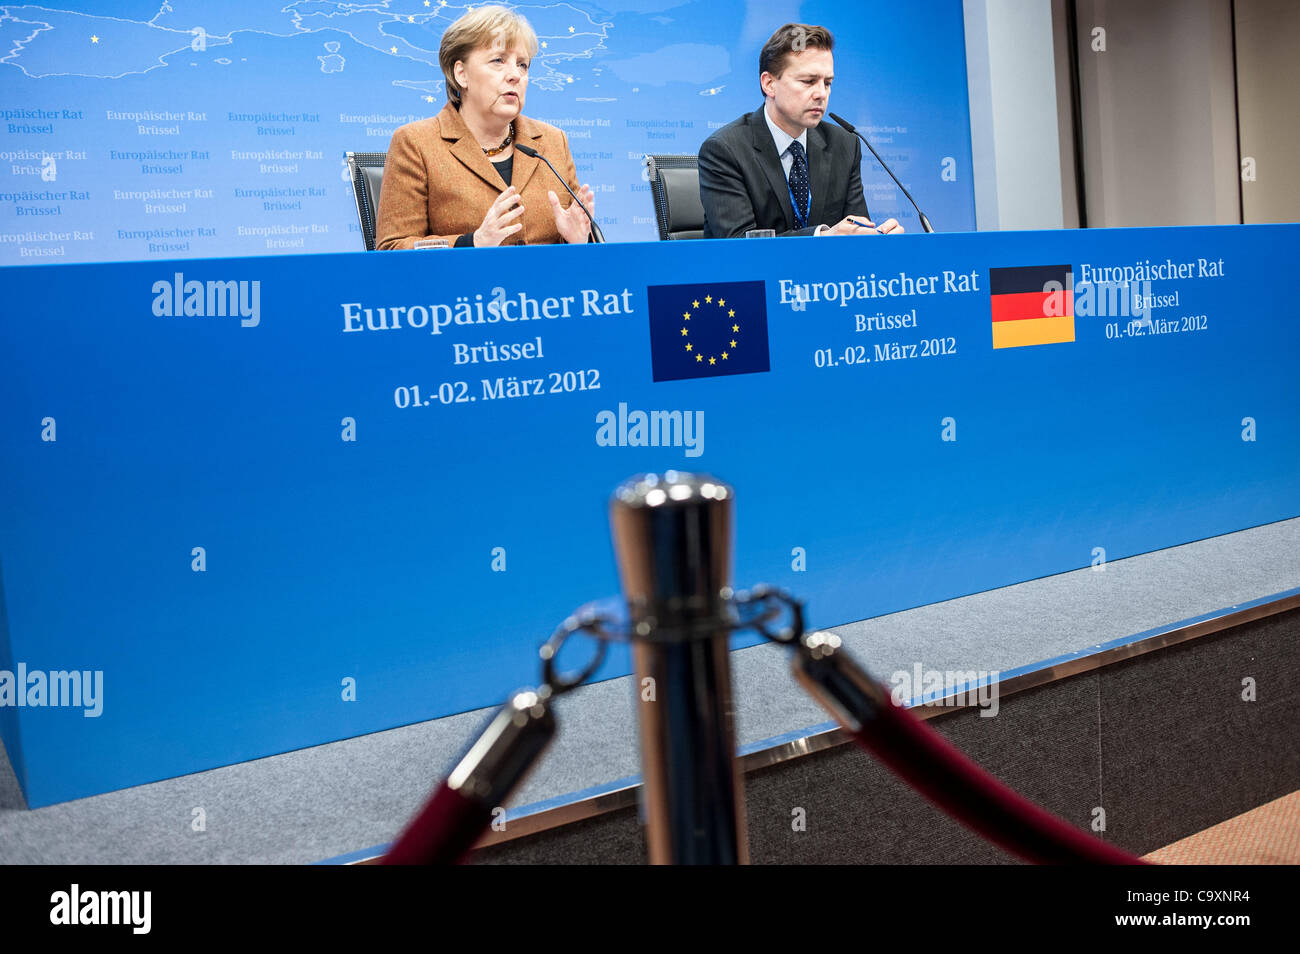 March 2, 2012 - Brussels, BXL, Belgium - Germany's Chancellor Angela Merkel   addresses a news conference at the end of a European Union leaders summit  in  Brussels, Belgium on 2012-03-02   by Wiktor Dabkowski (Credit Image: © Wiktor Dabkowski/ZUMAPRESS.com) Stock Photo